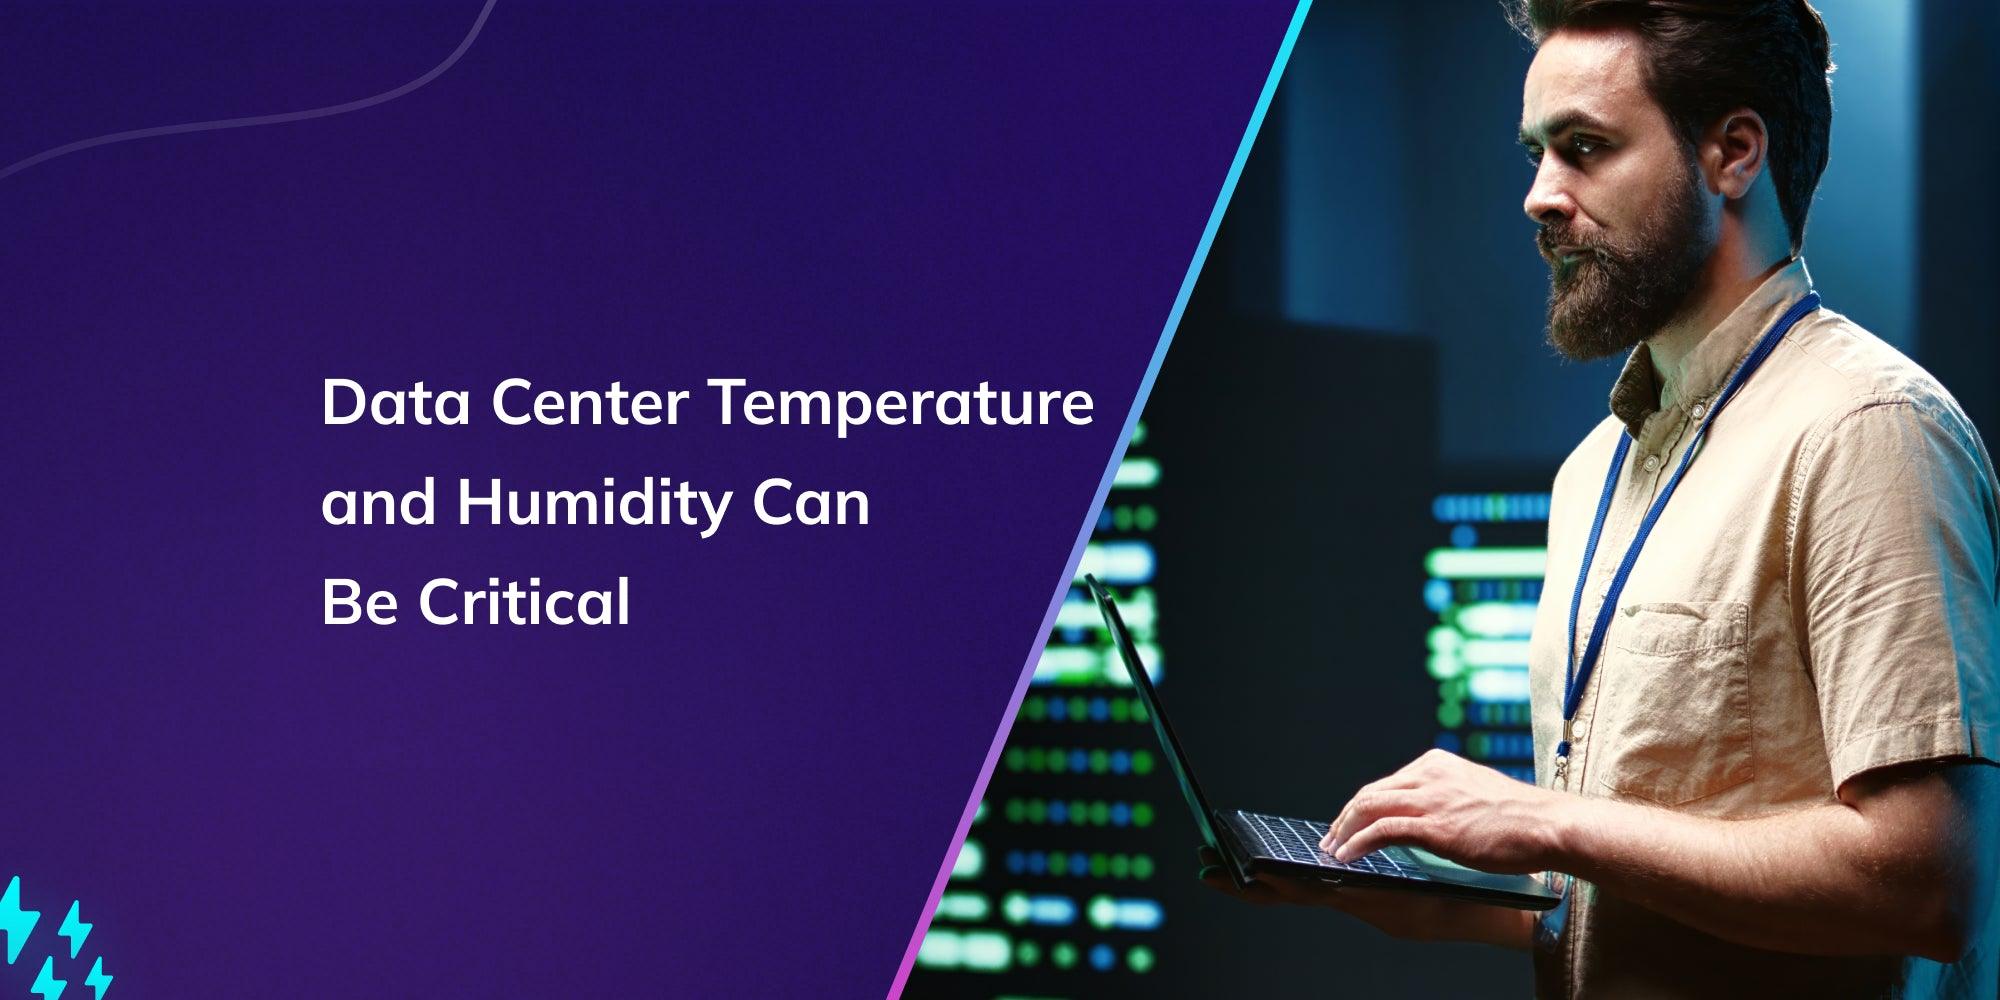 Data Center Temperature and Humidity Can Be Critical